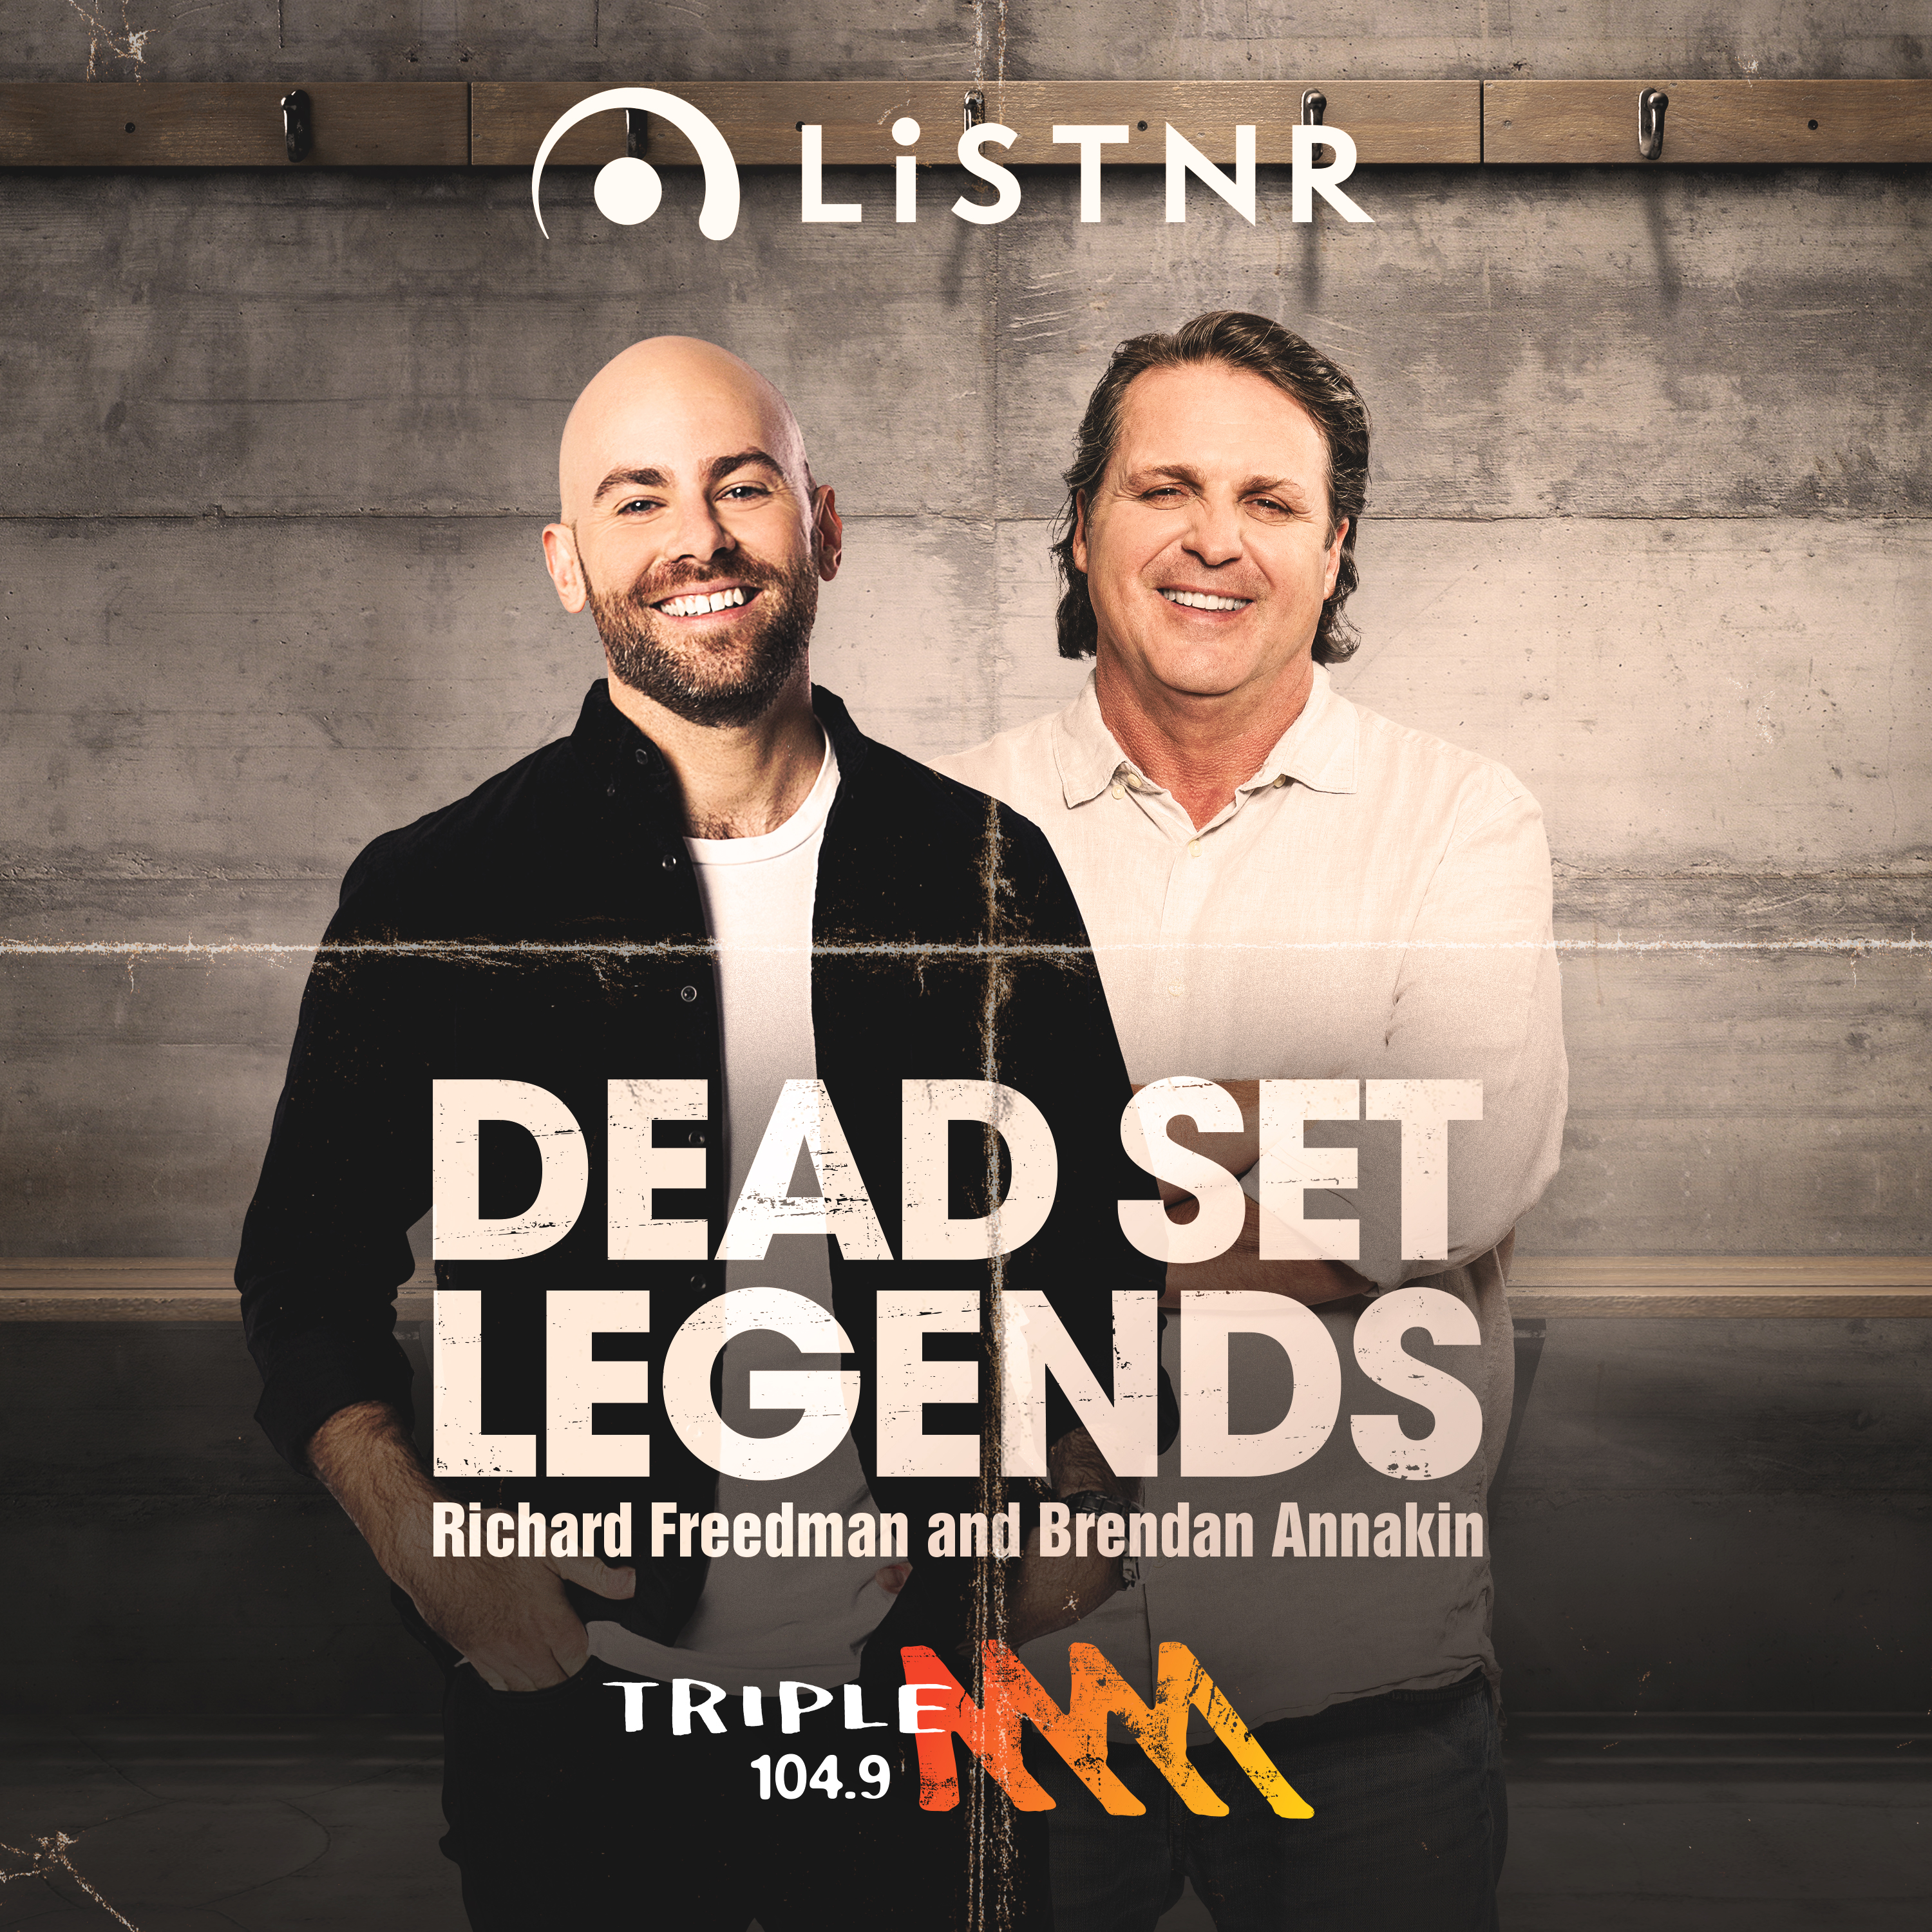 Dead Set Legends | The Legends Pay Tribute To The Great Shane Warne